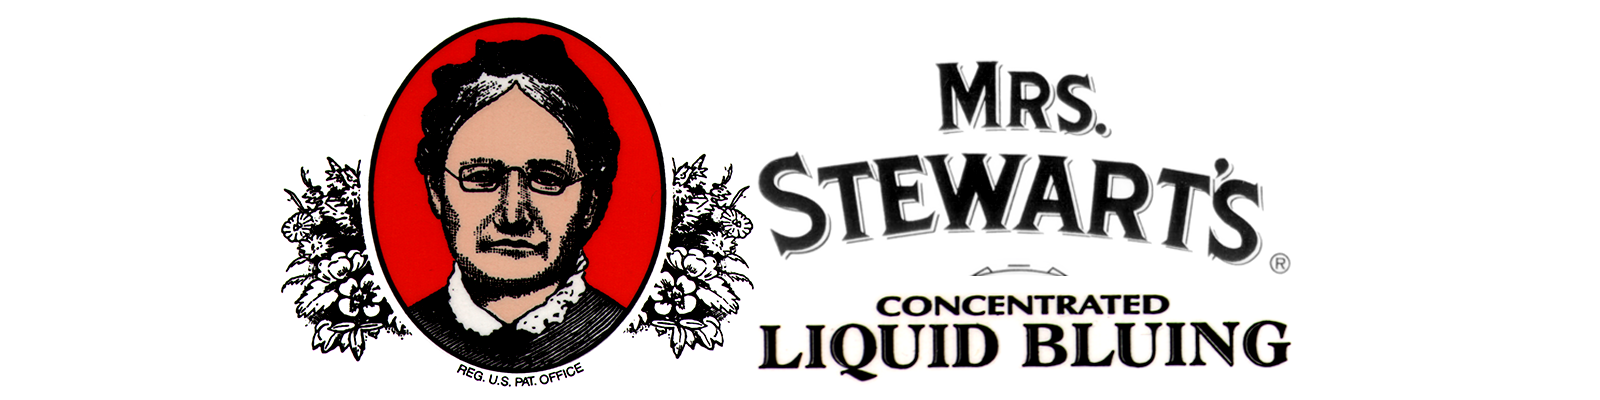 Mrs. Stewarts Concentrated Liquid Bluing - Great for Laundry - 1